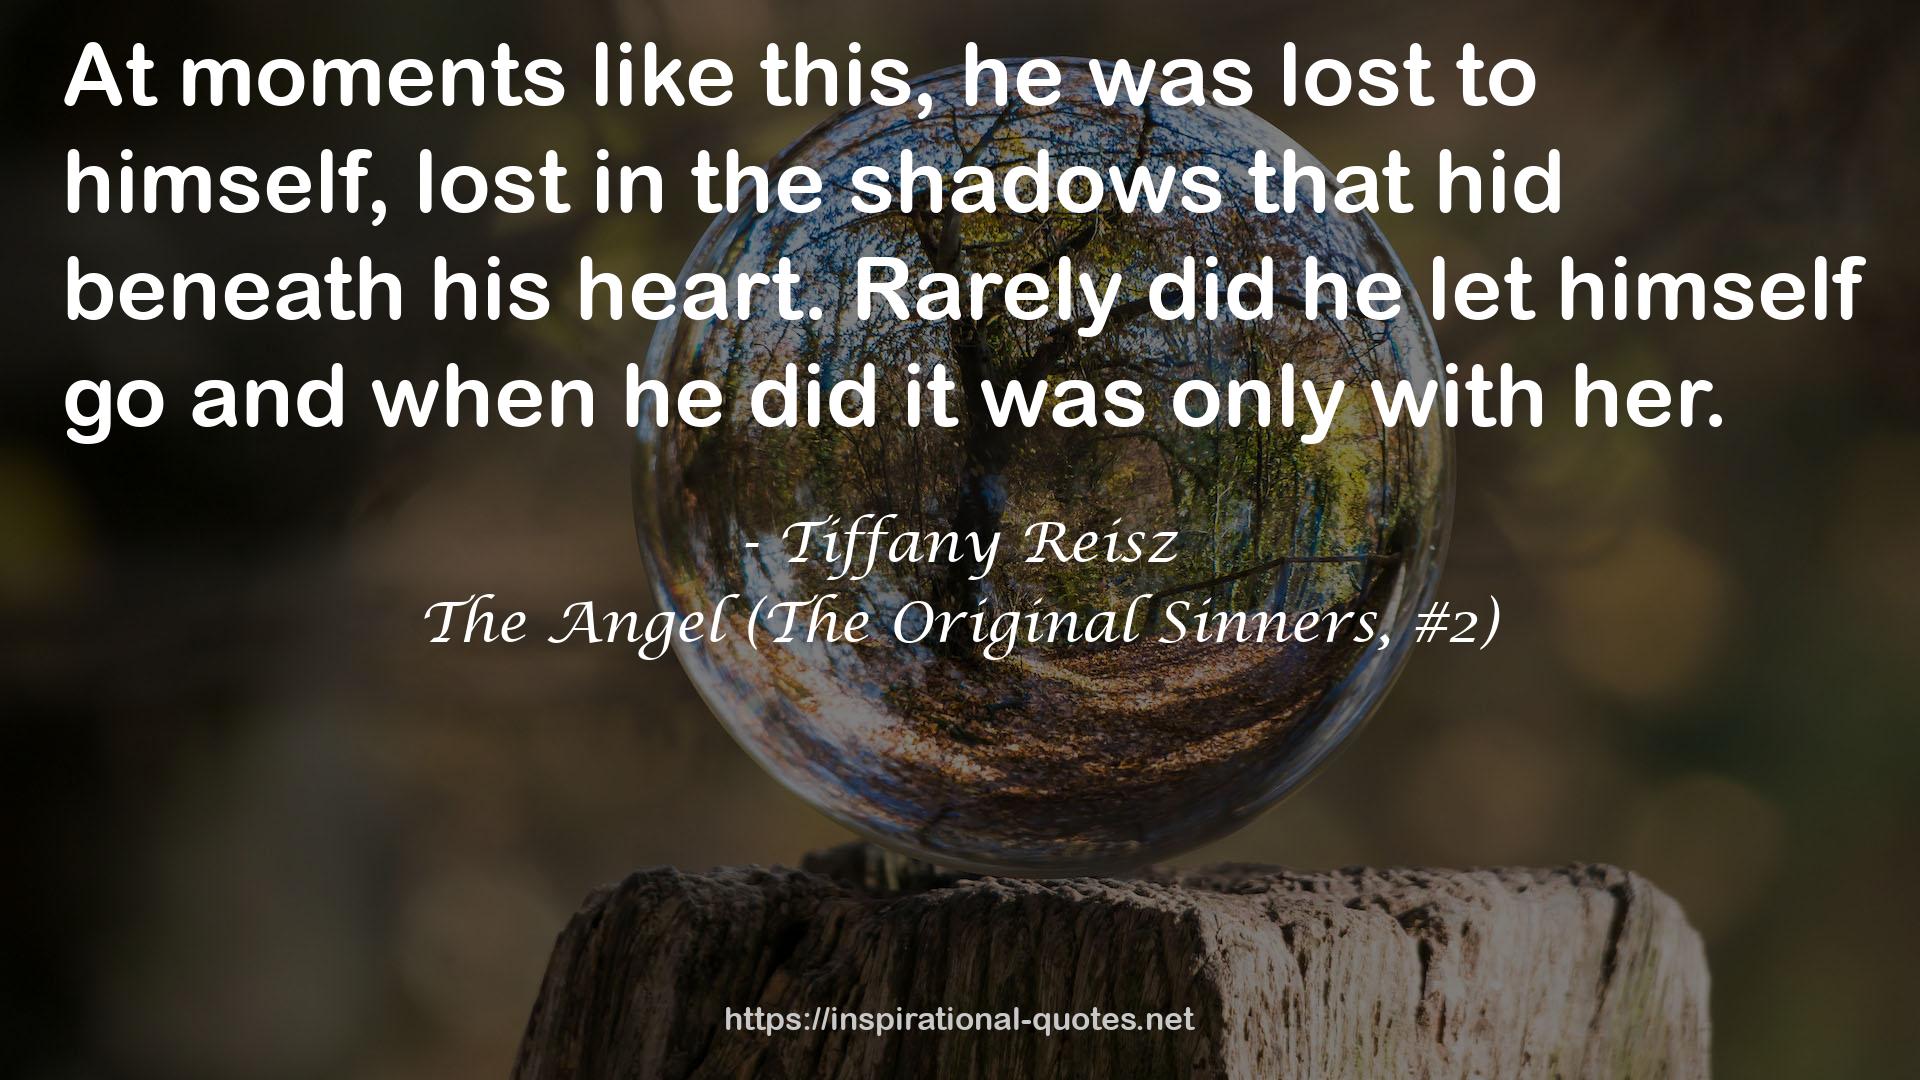 The Angel (The Original Sinners, #2) QUOTES